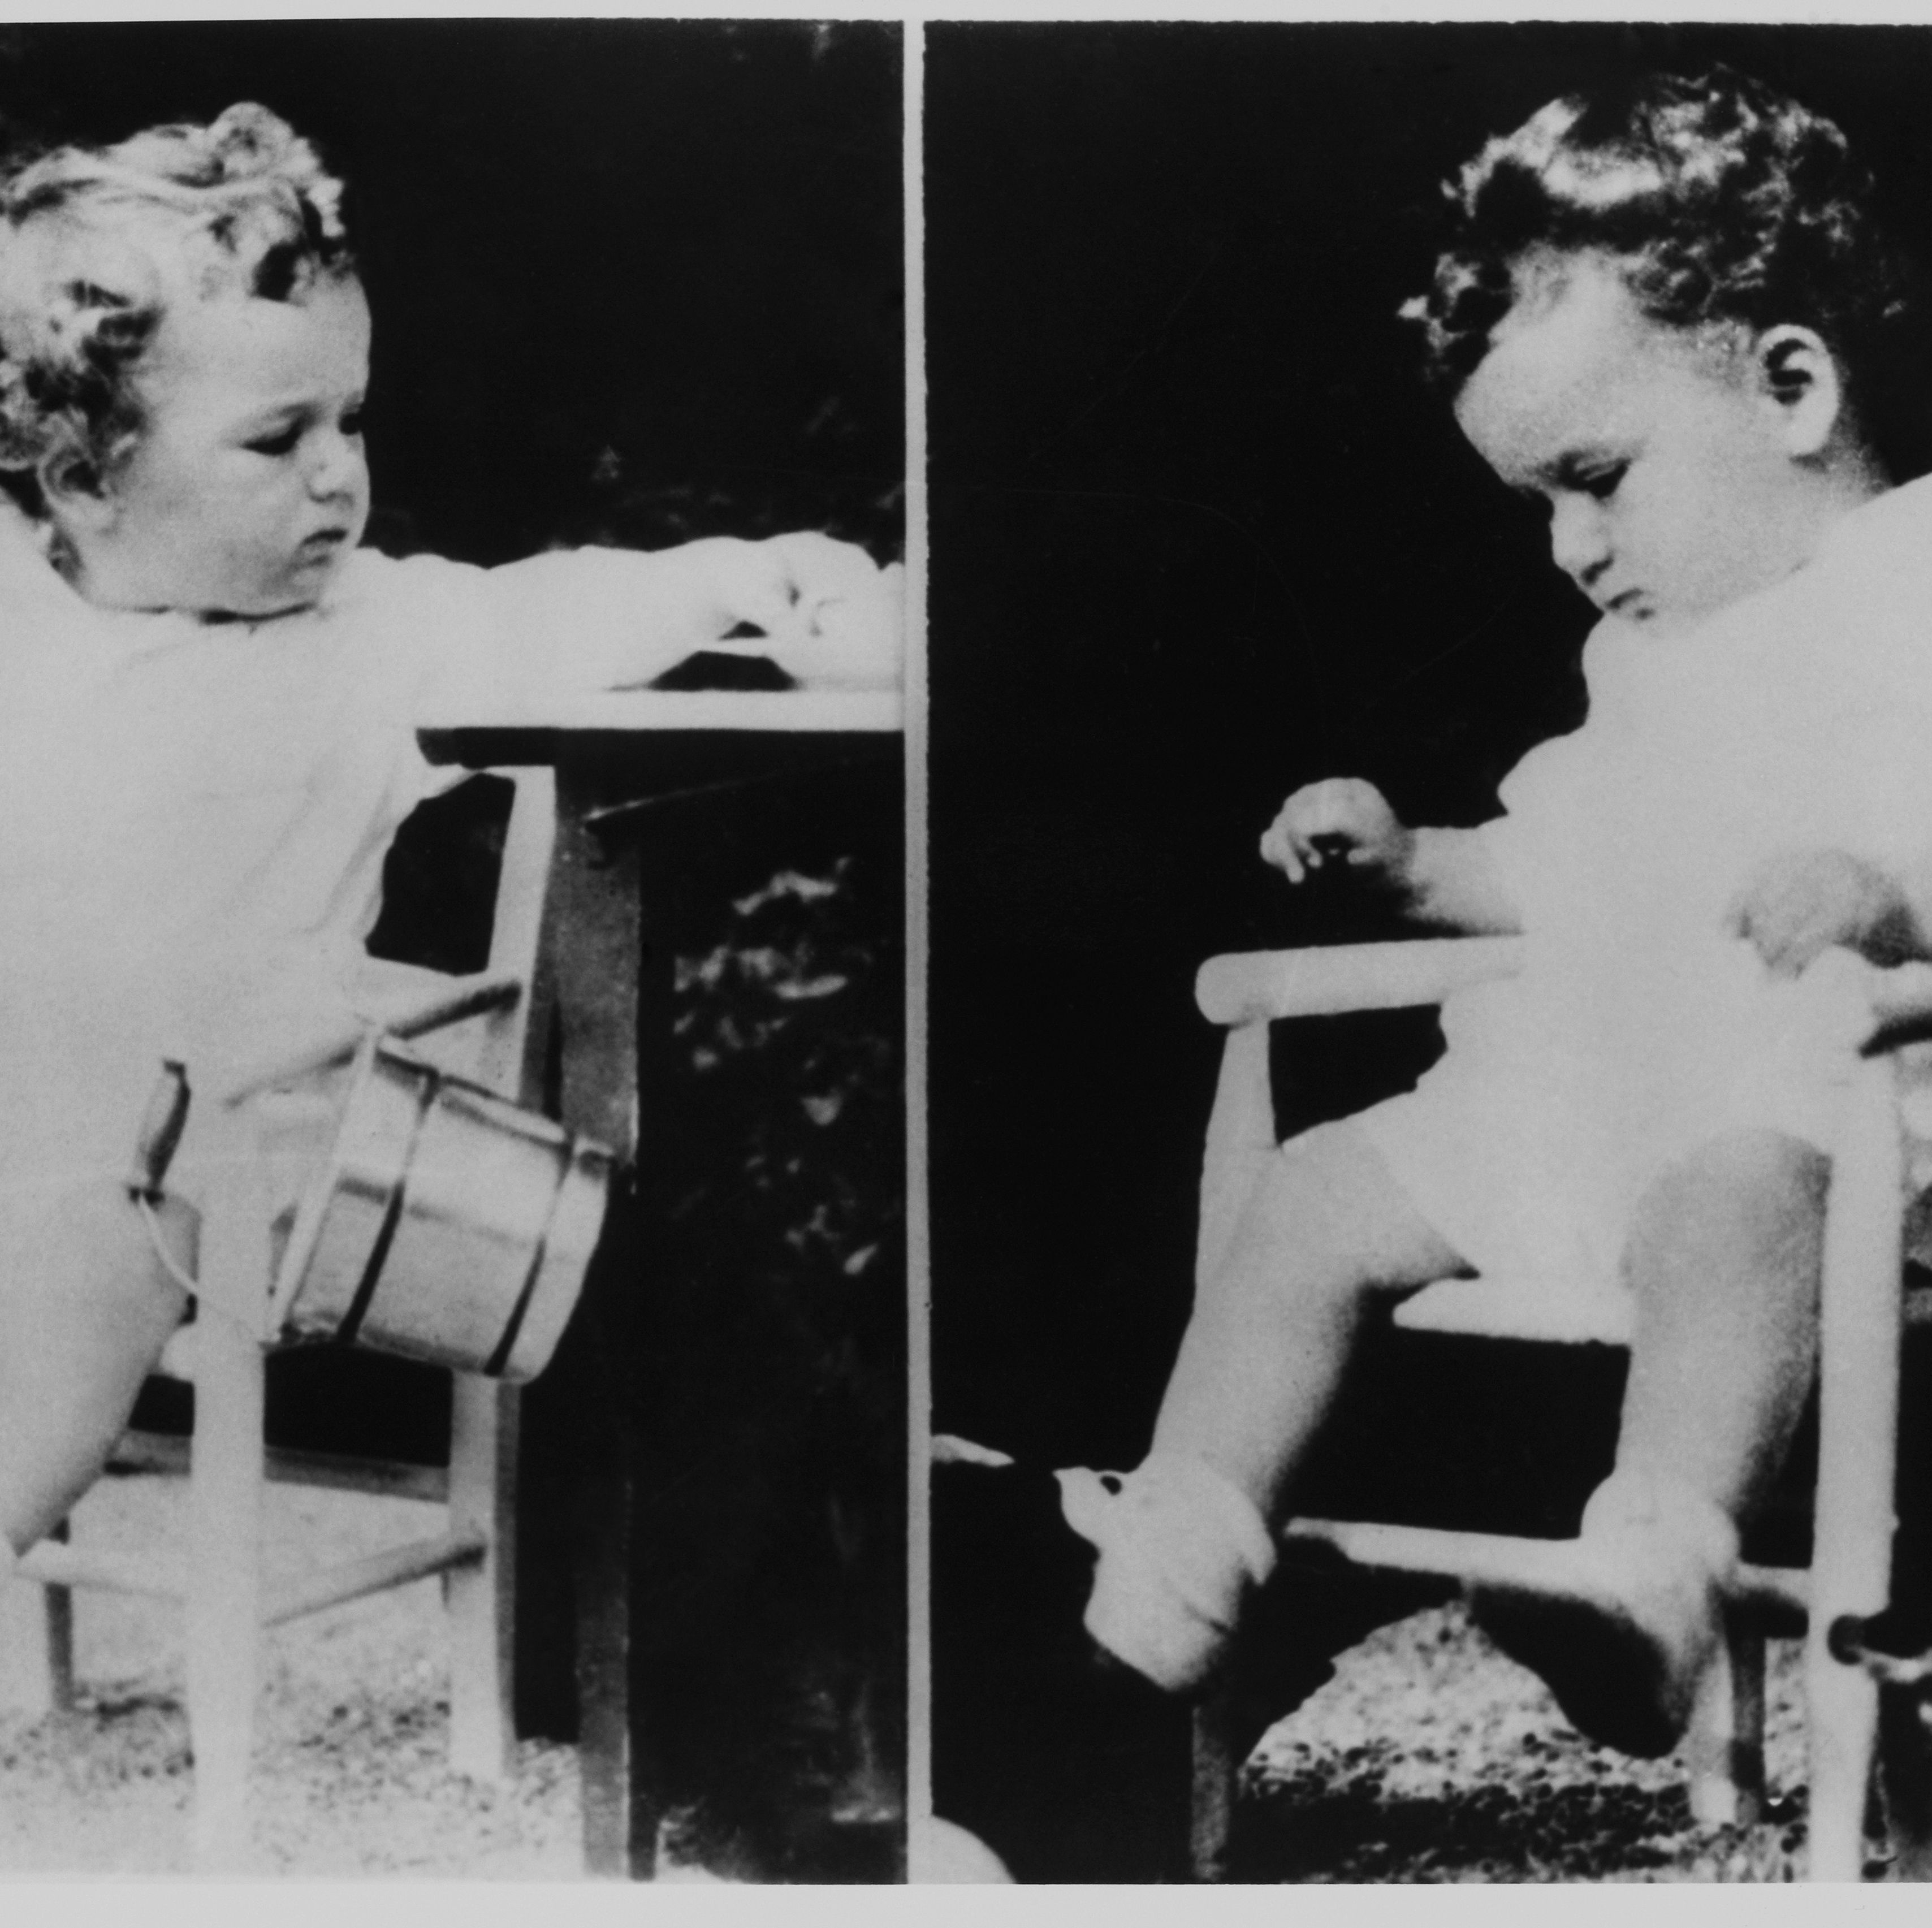 The Lindbergh Baby Mystery Has Lasted 91 Years. Tantalizing Evidence May Solve It.